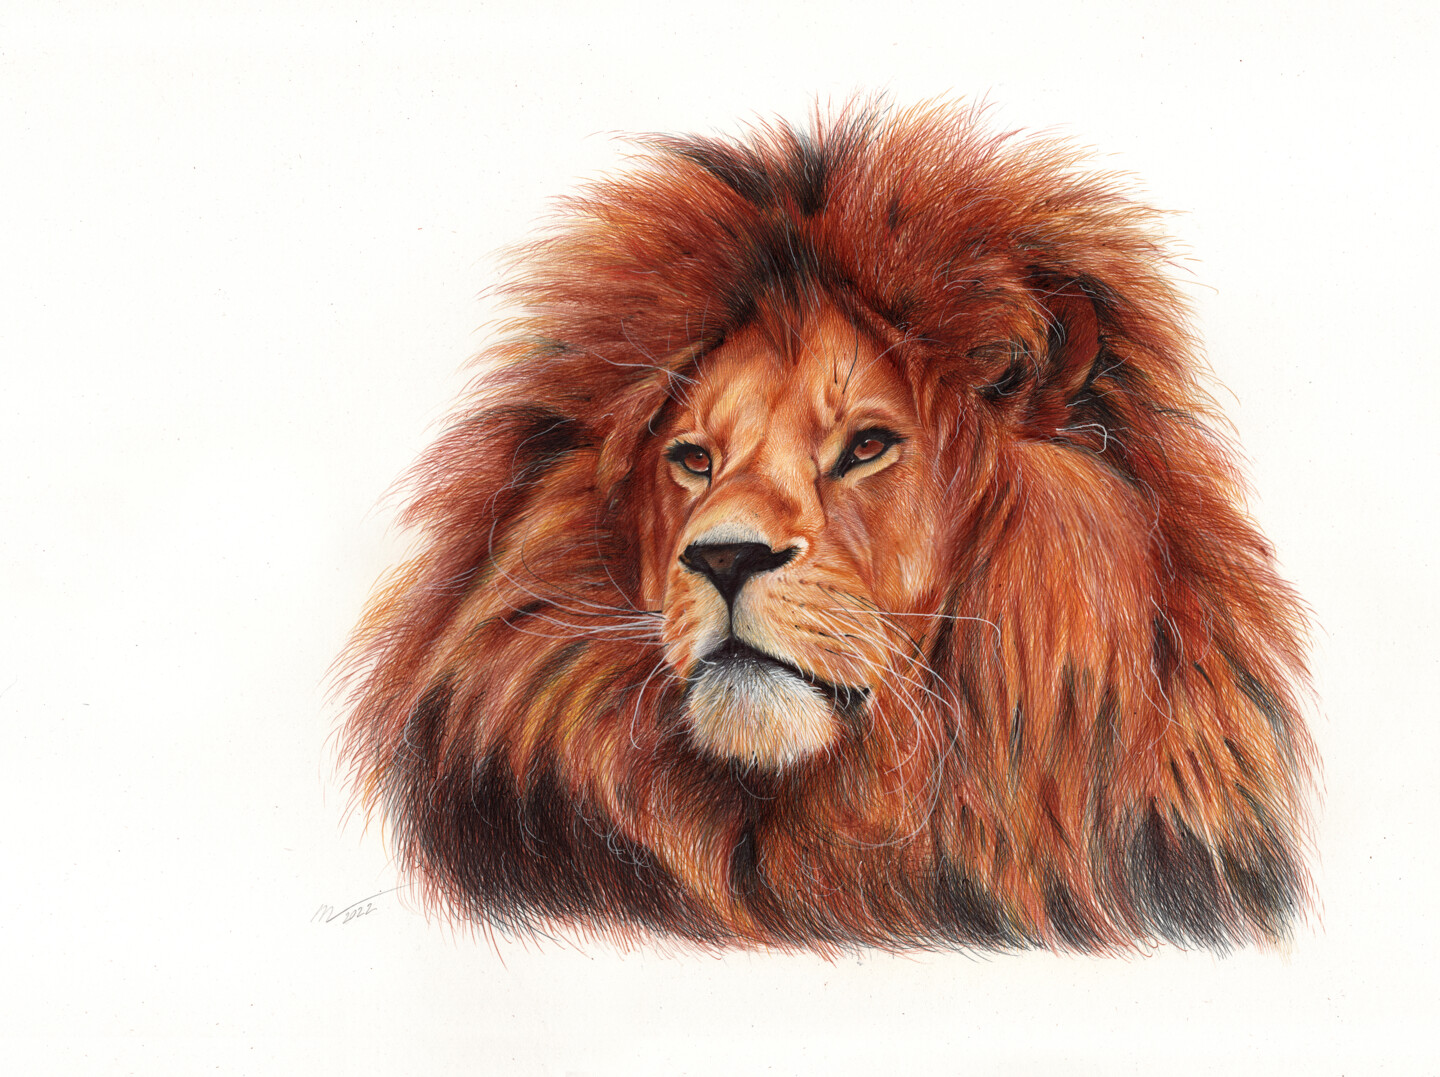 Lion - Animal Portrait (Photorealistic D, Drawing by Daria Maier | Artmajeur